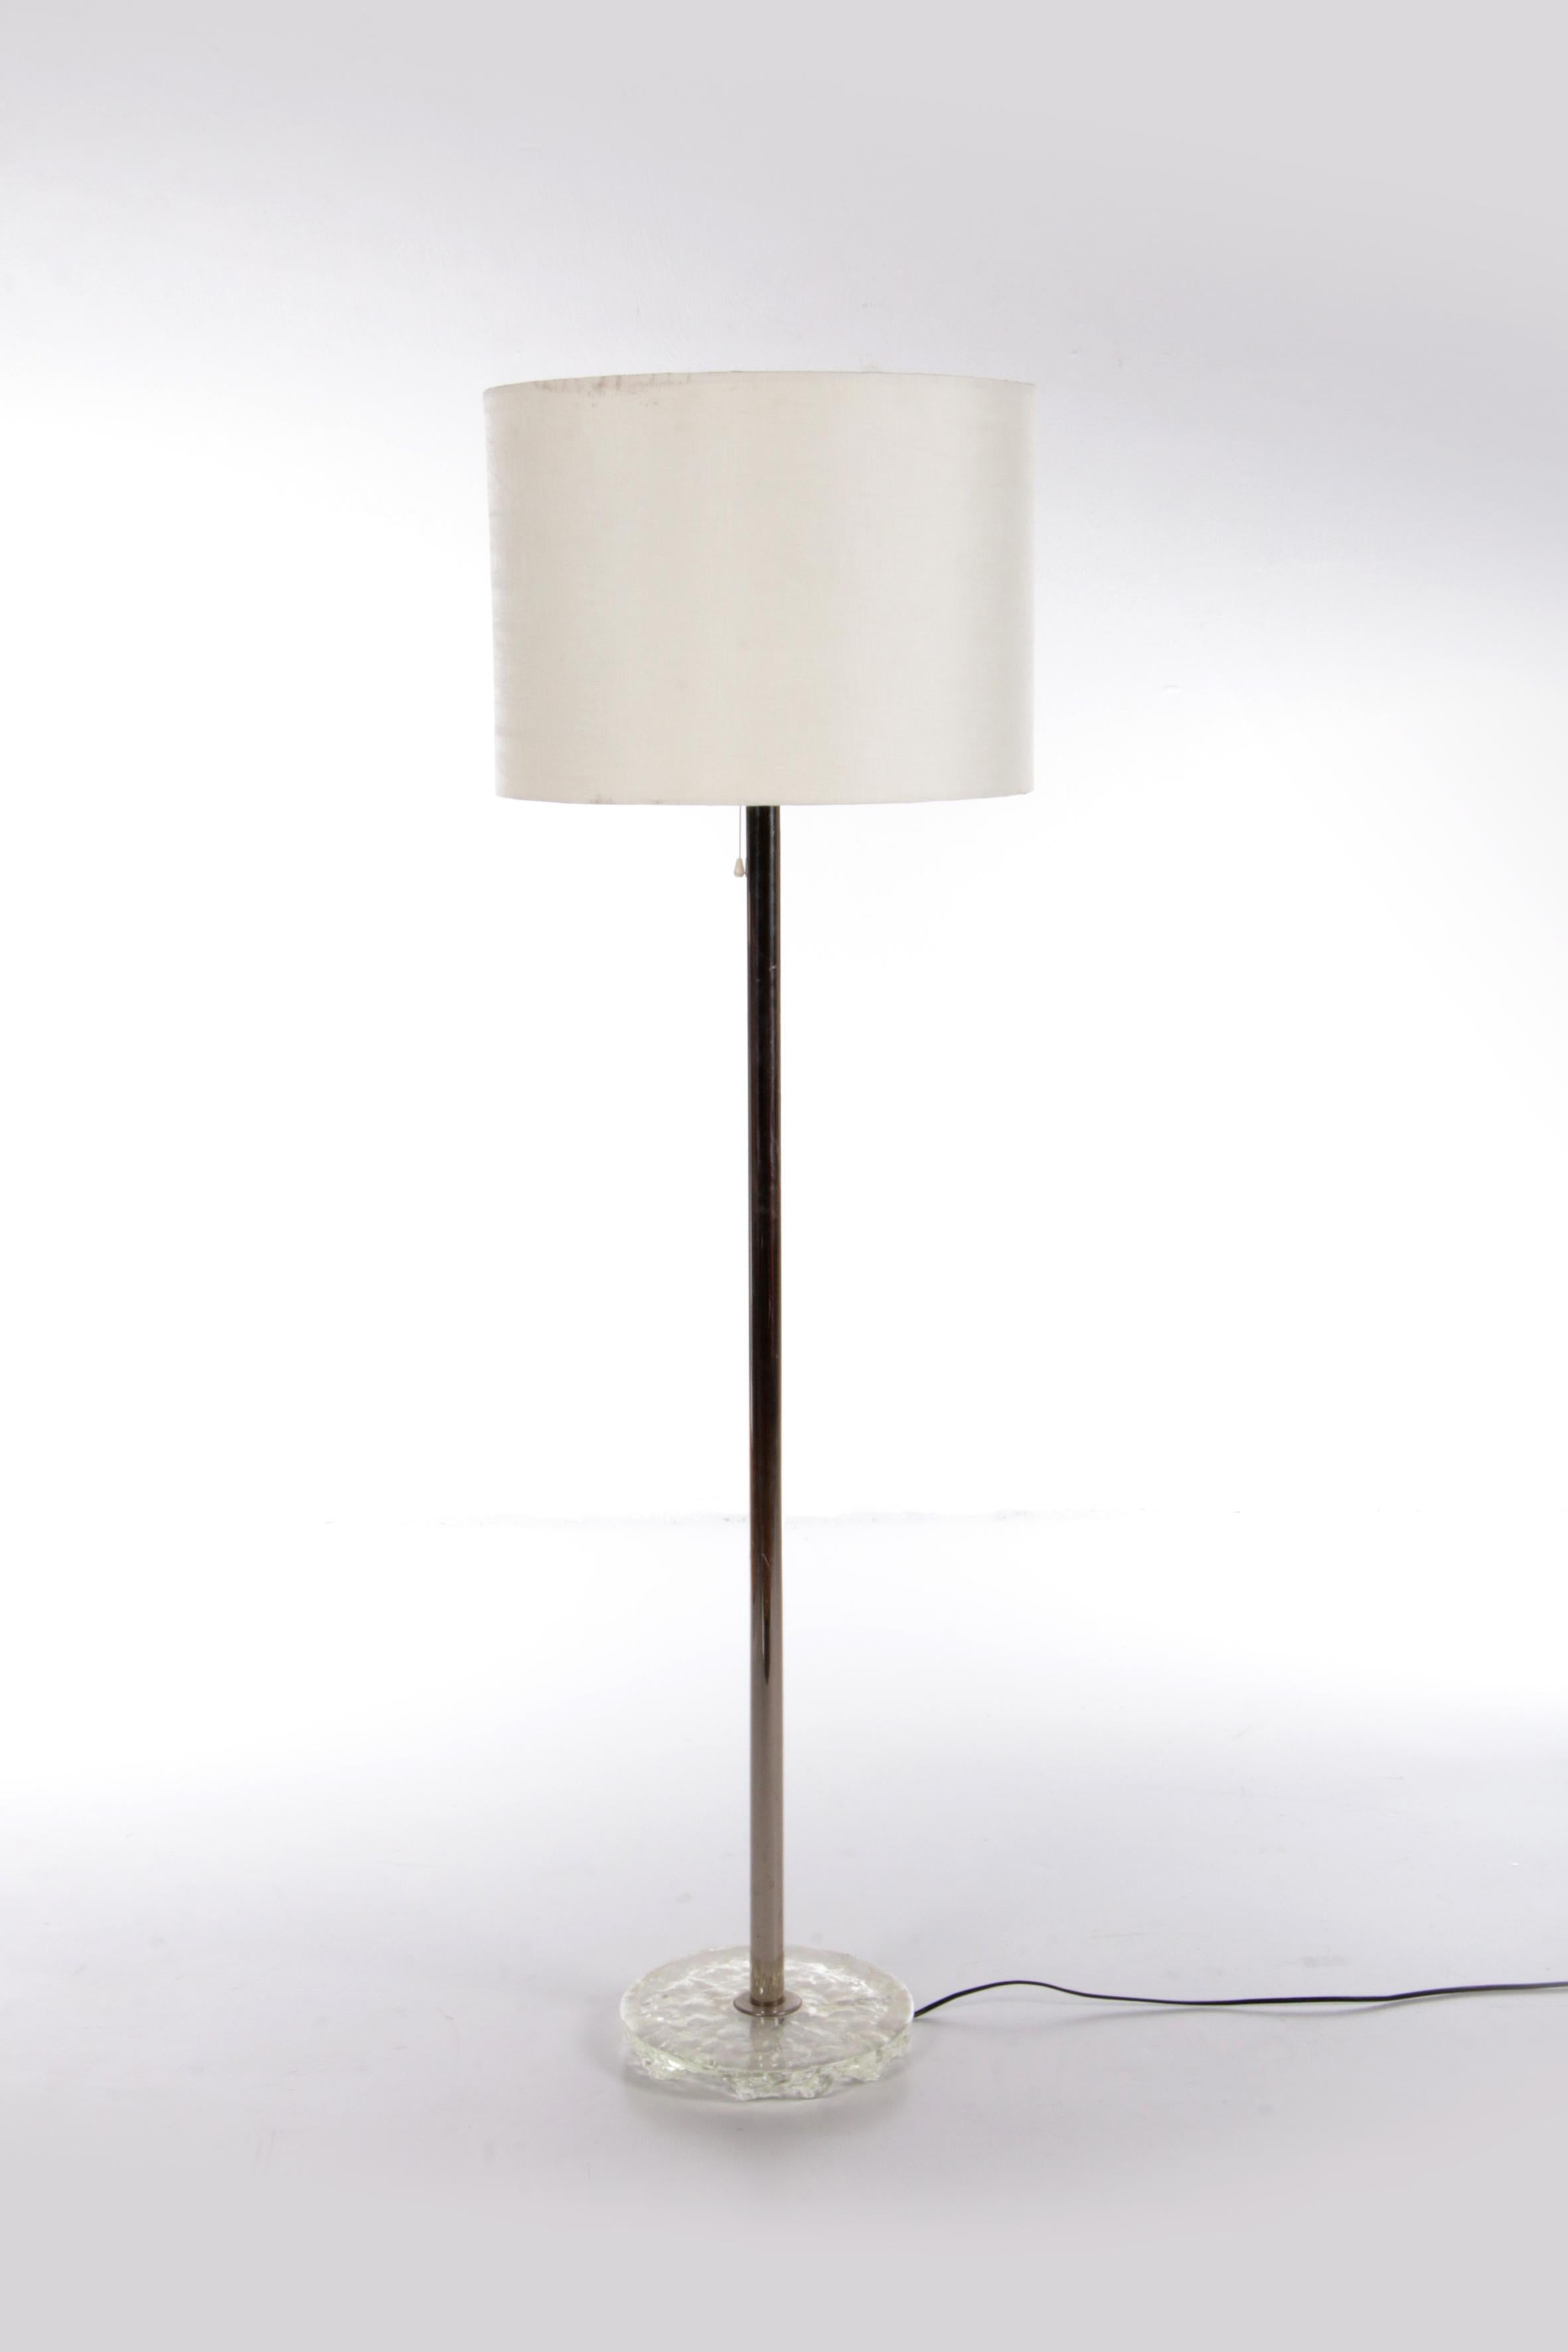 Large Floor Lamp with Chrome Stem and 3 Light Fittings in the Shade by Temde For Sale 9